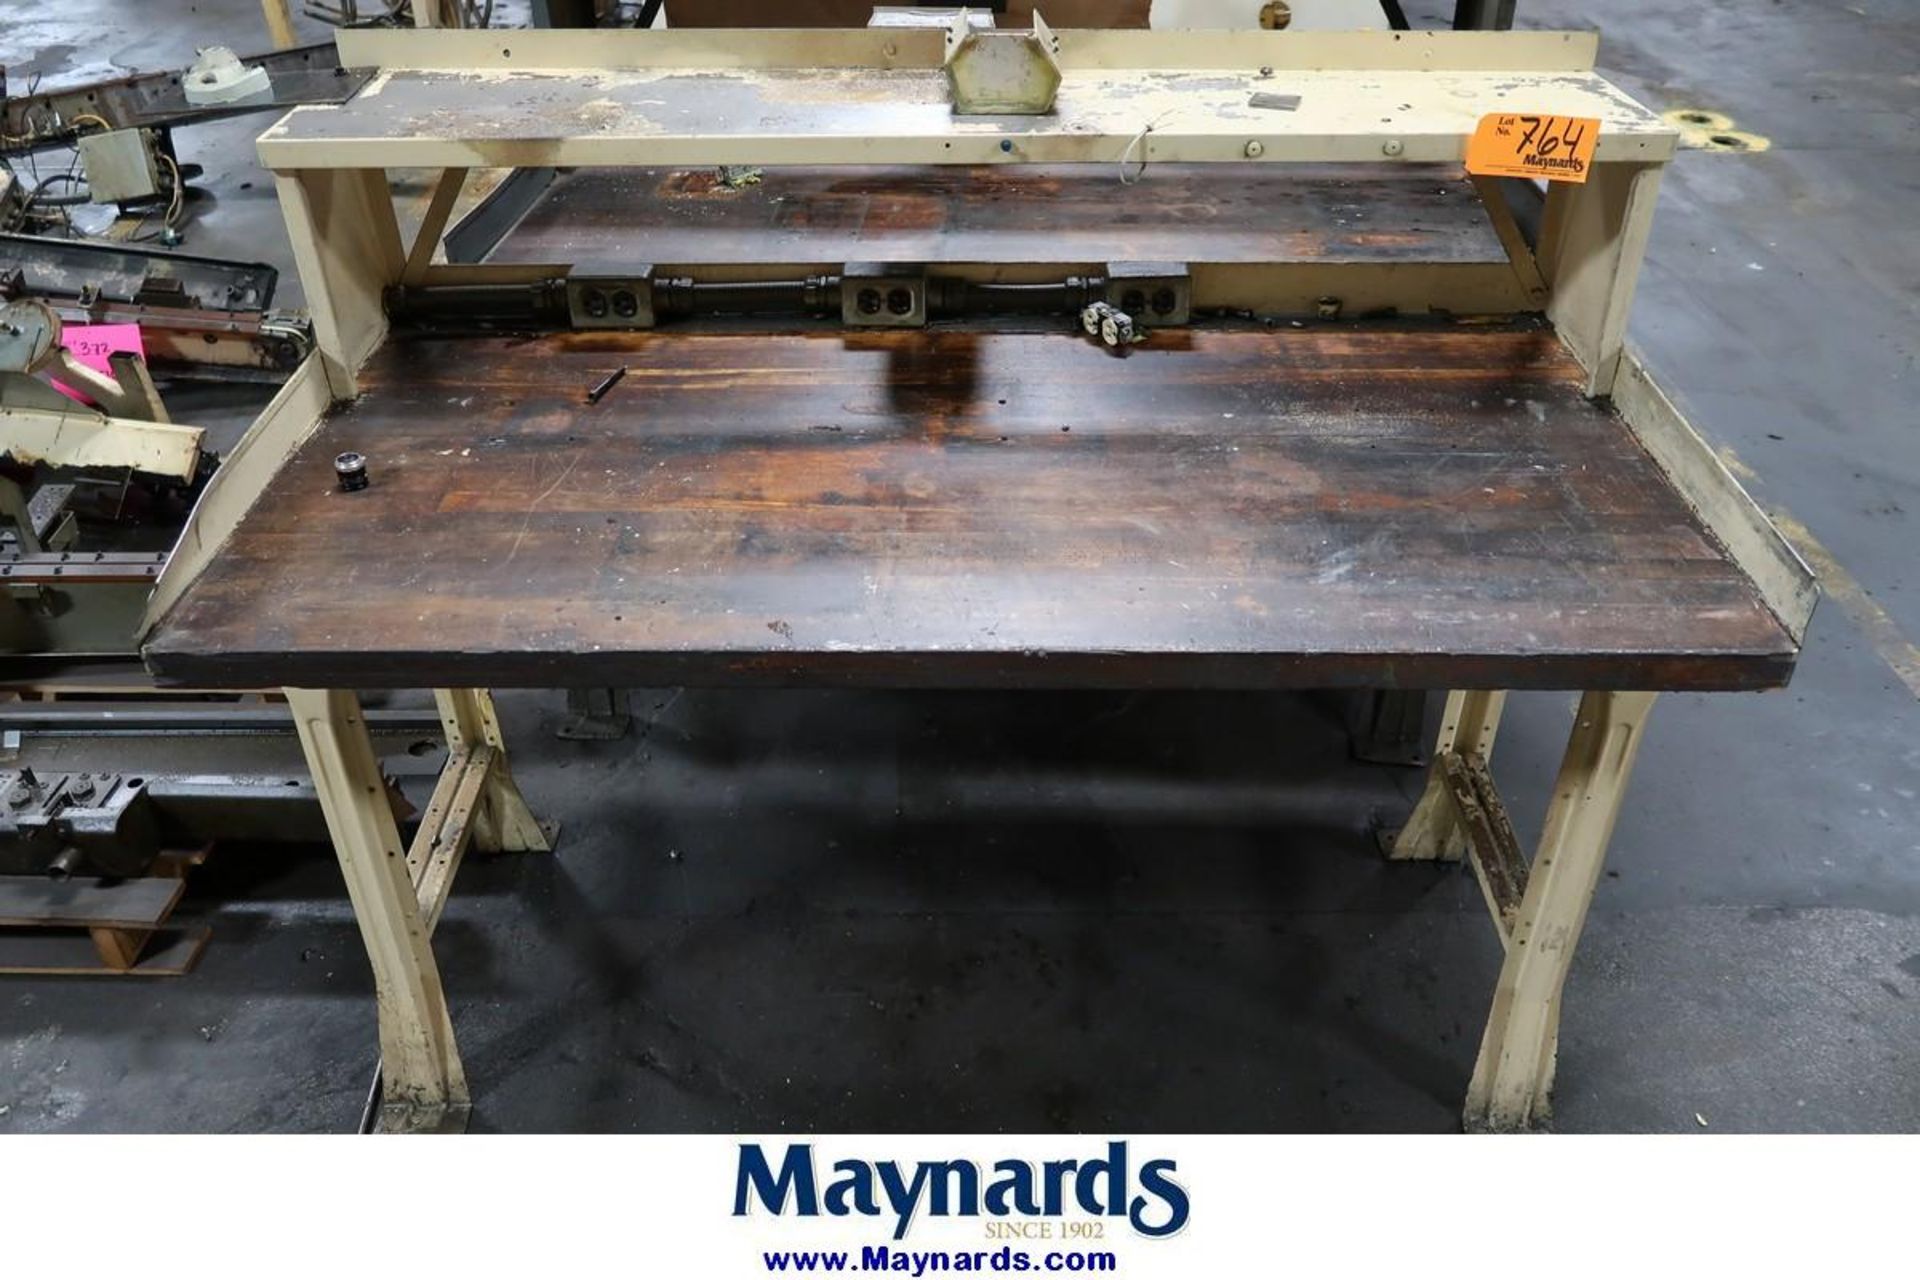 Wood Top Work Benches - Image 2 of 2